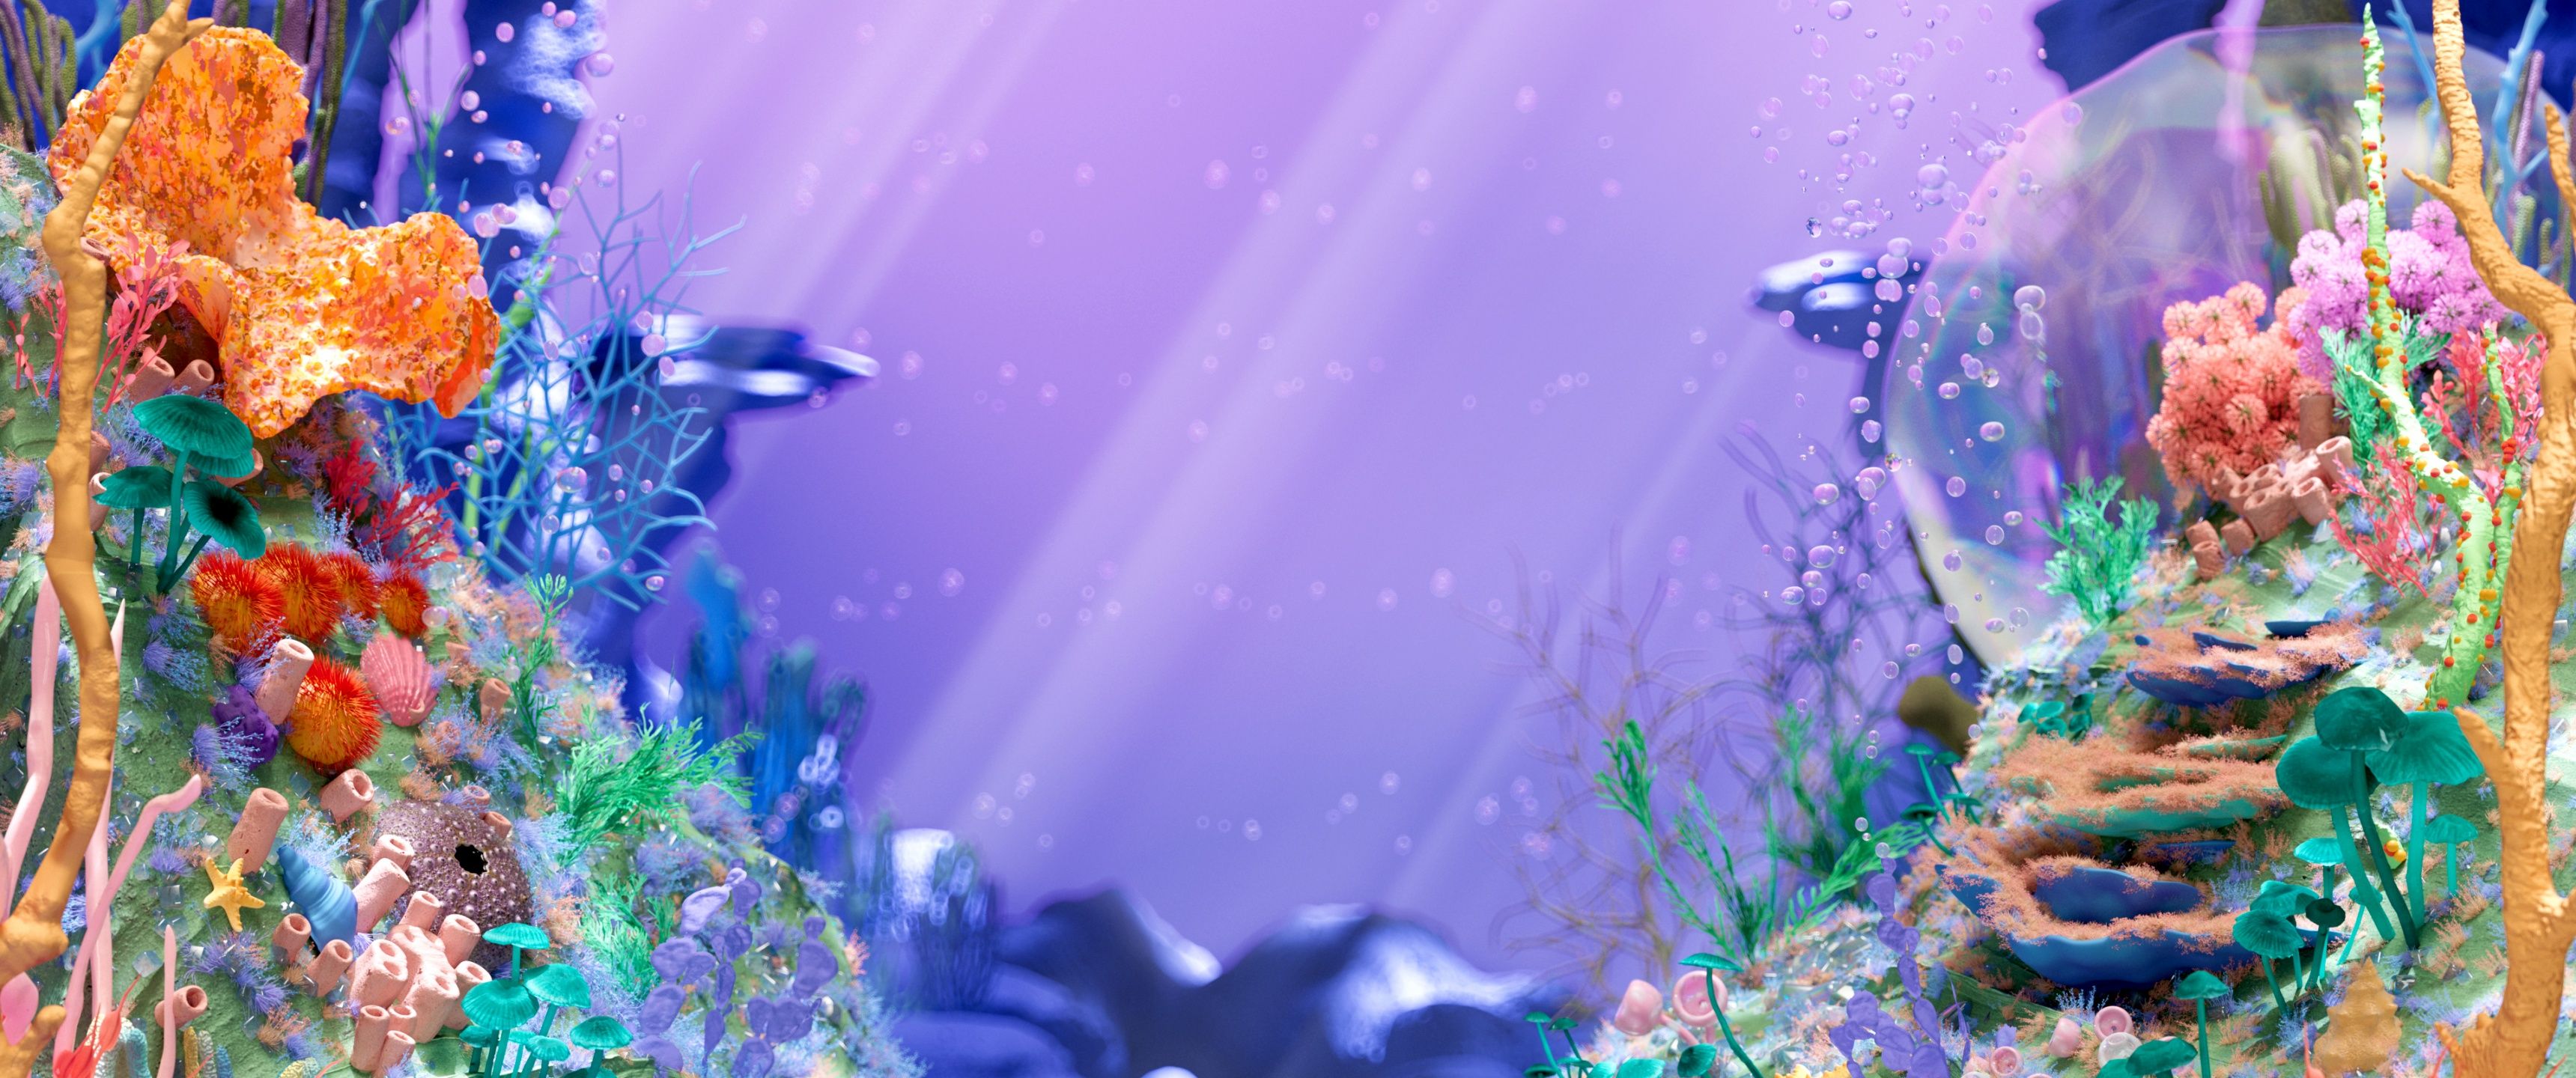 A fish tank with a purple background - 3440x1440, underwater